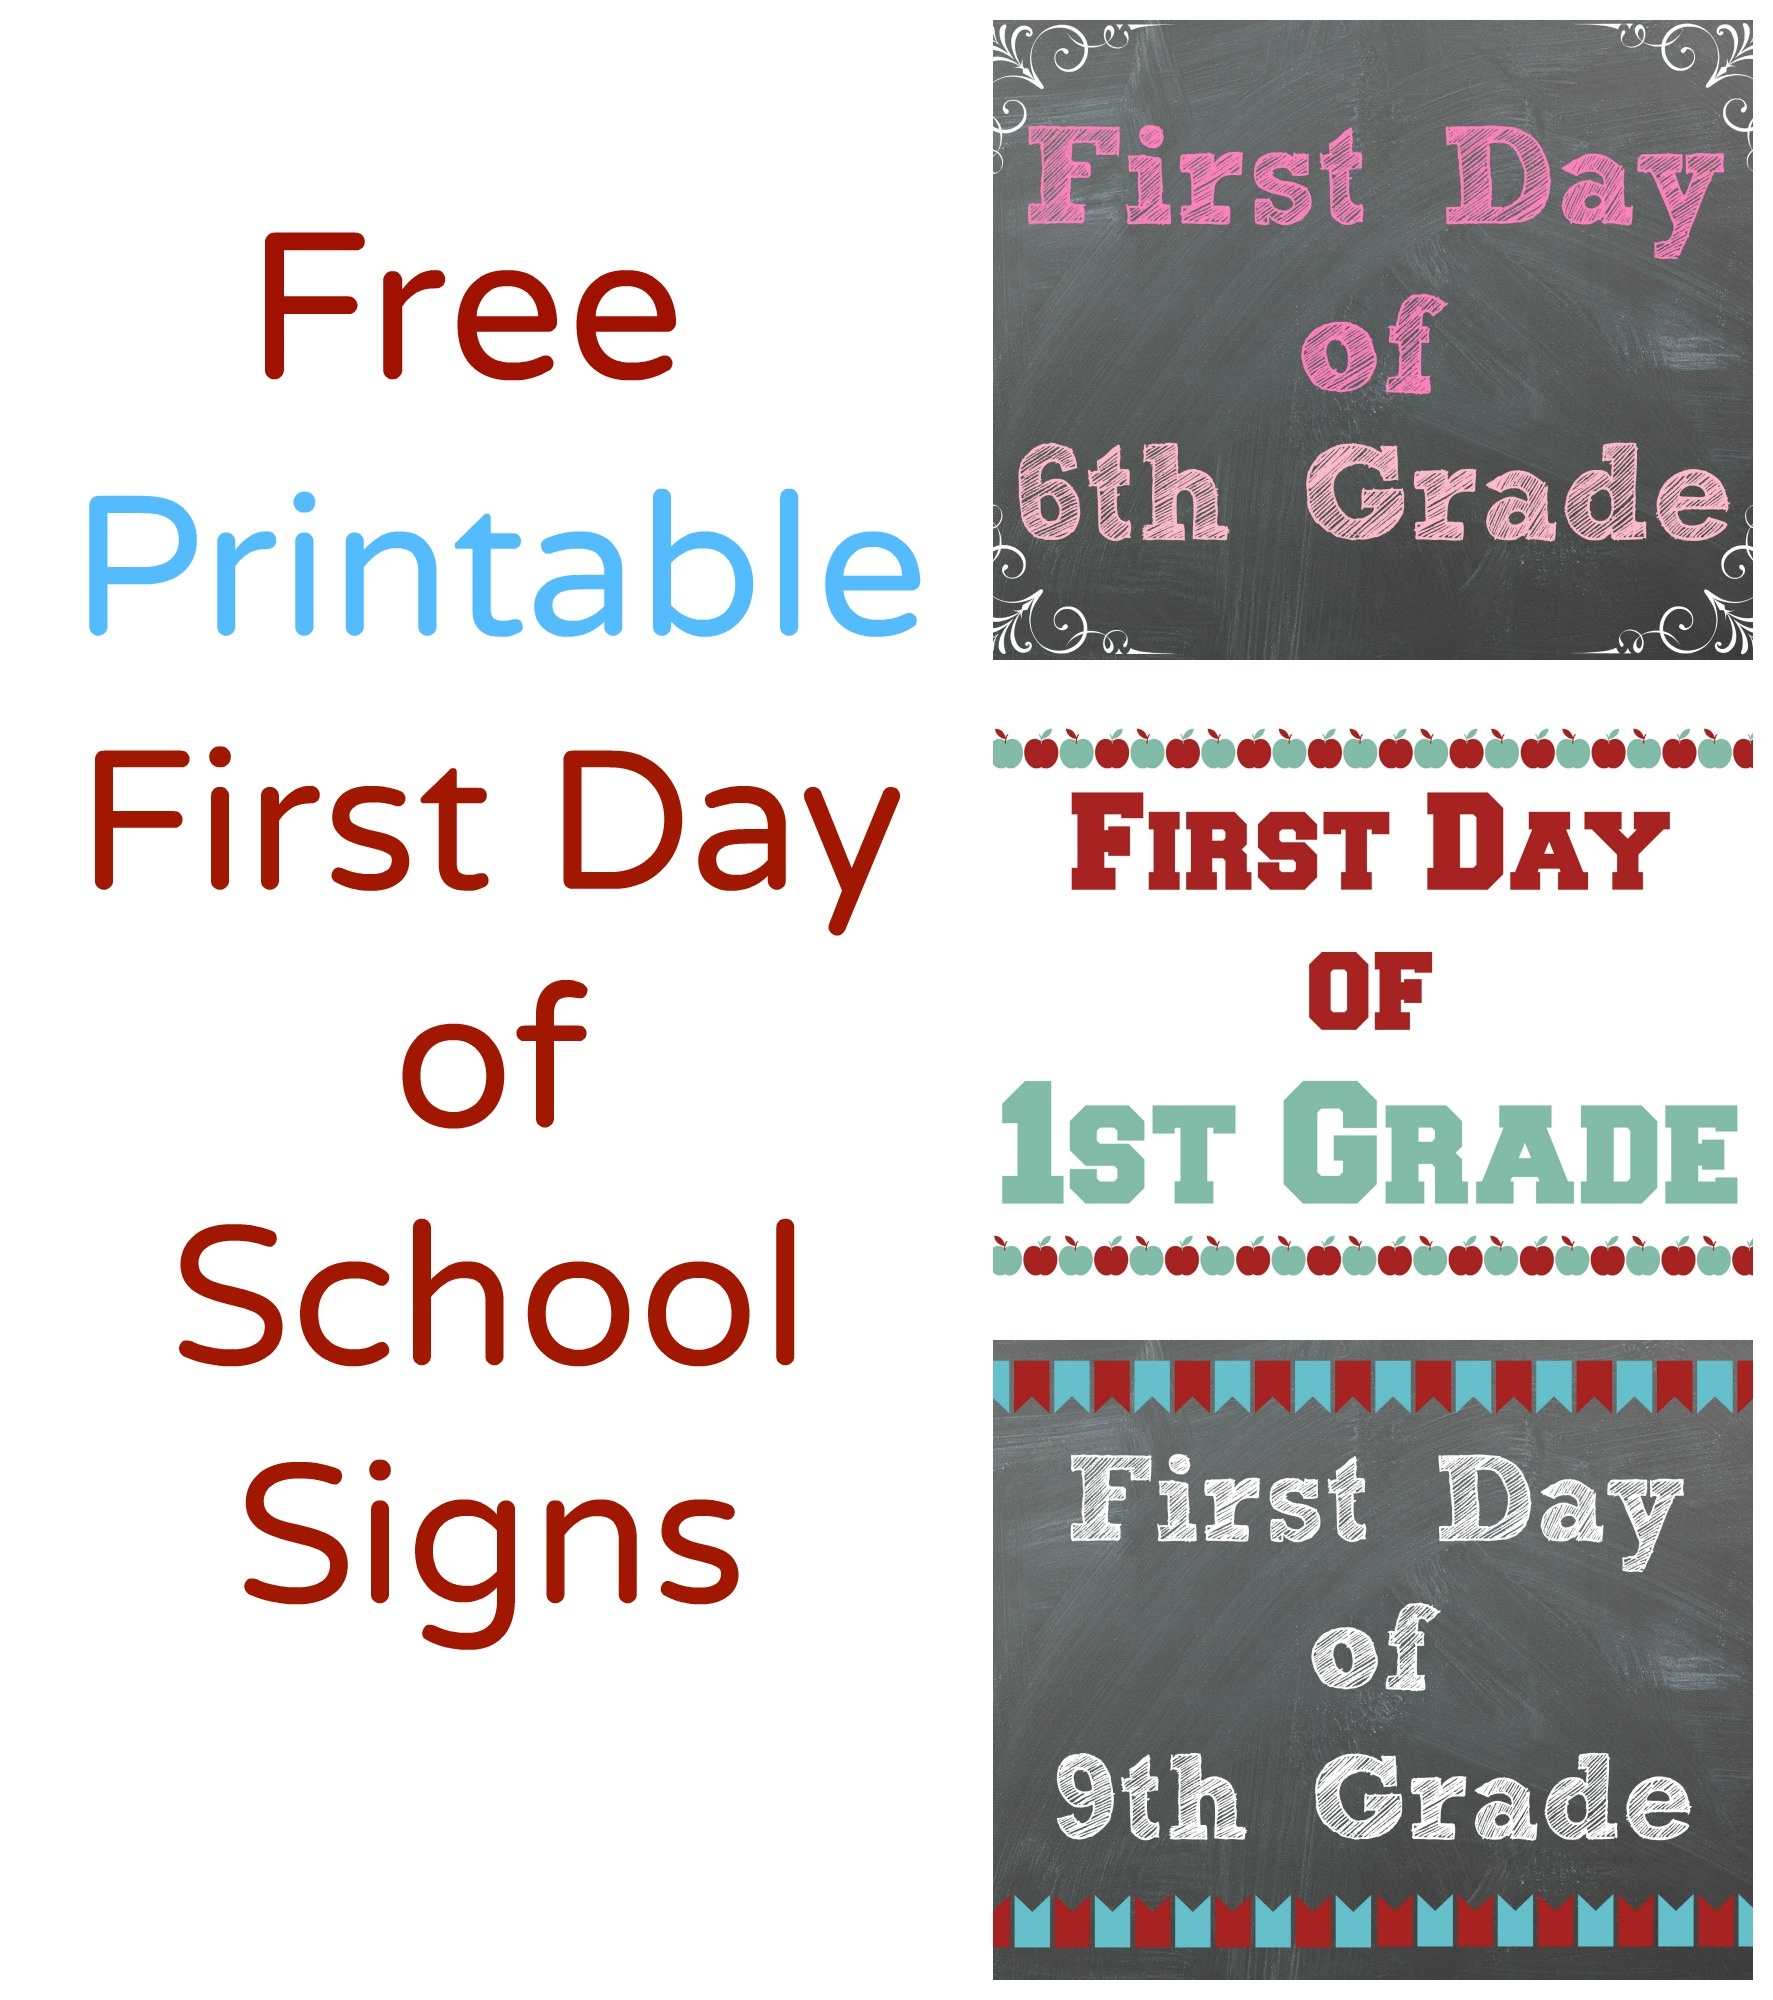 Free Printable First Day Of School Signs - Making It All Work - Free Printable First Day Of School Signs